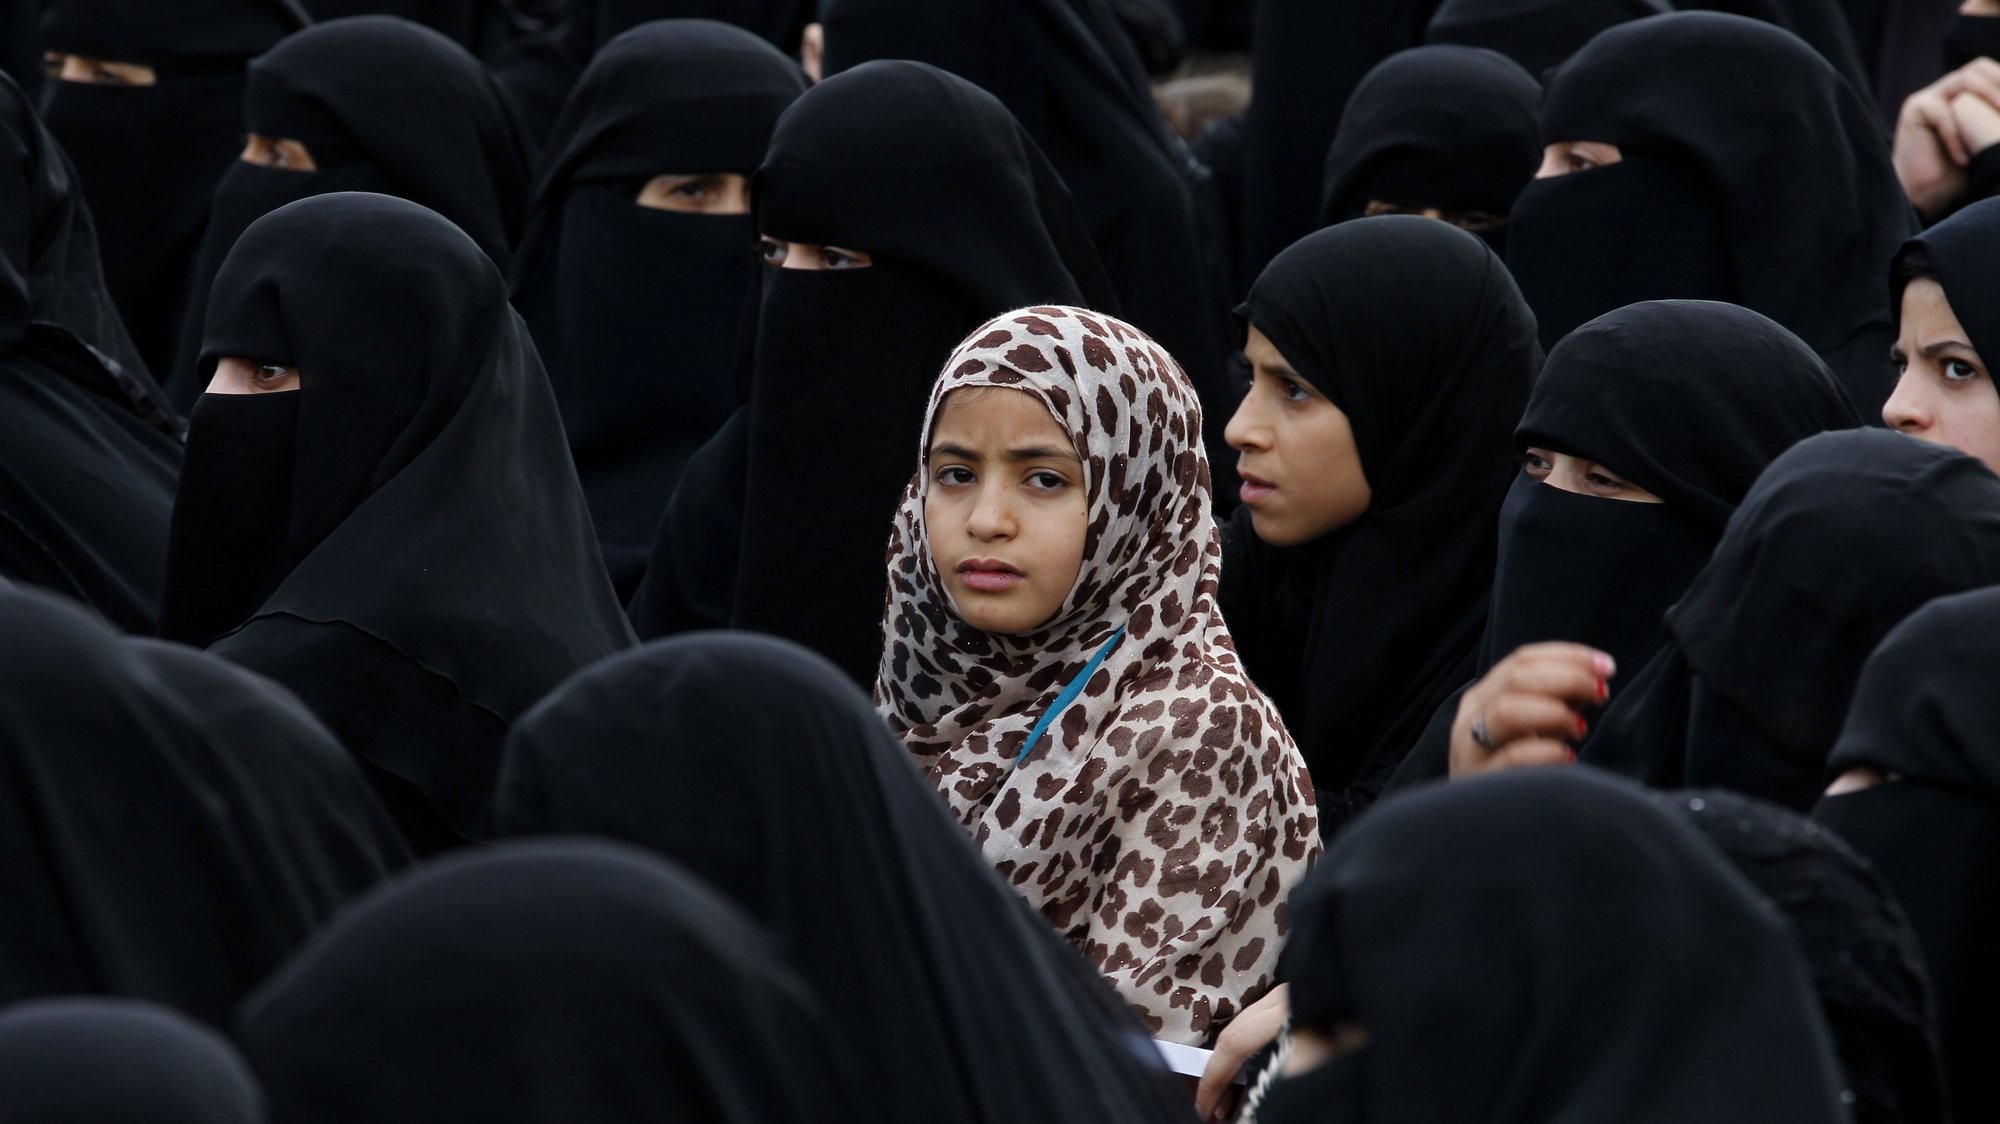 epa06046339 Houthi female supporters attend an anti-Israel rally marking Al-Quds Day (Jerusalem Day) in Sana&#039;a, Yemen, 23 June 2017. Many Muslim countries mark Al-Quds day, an annual day of protest decreed in 1979 by the late Iranian ruler Ayatollah Khomeini, on the last Friday of the holy fasting month of Ramadan to demand the end of Israeli occupation of Jerusalem and for the establishment of an independent state of Palestine.  EPA/YAHYA ARHAB